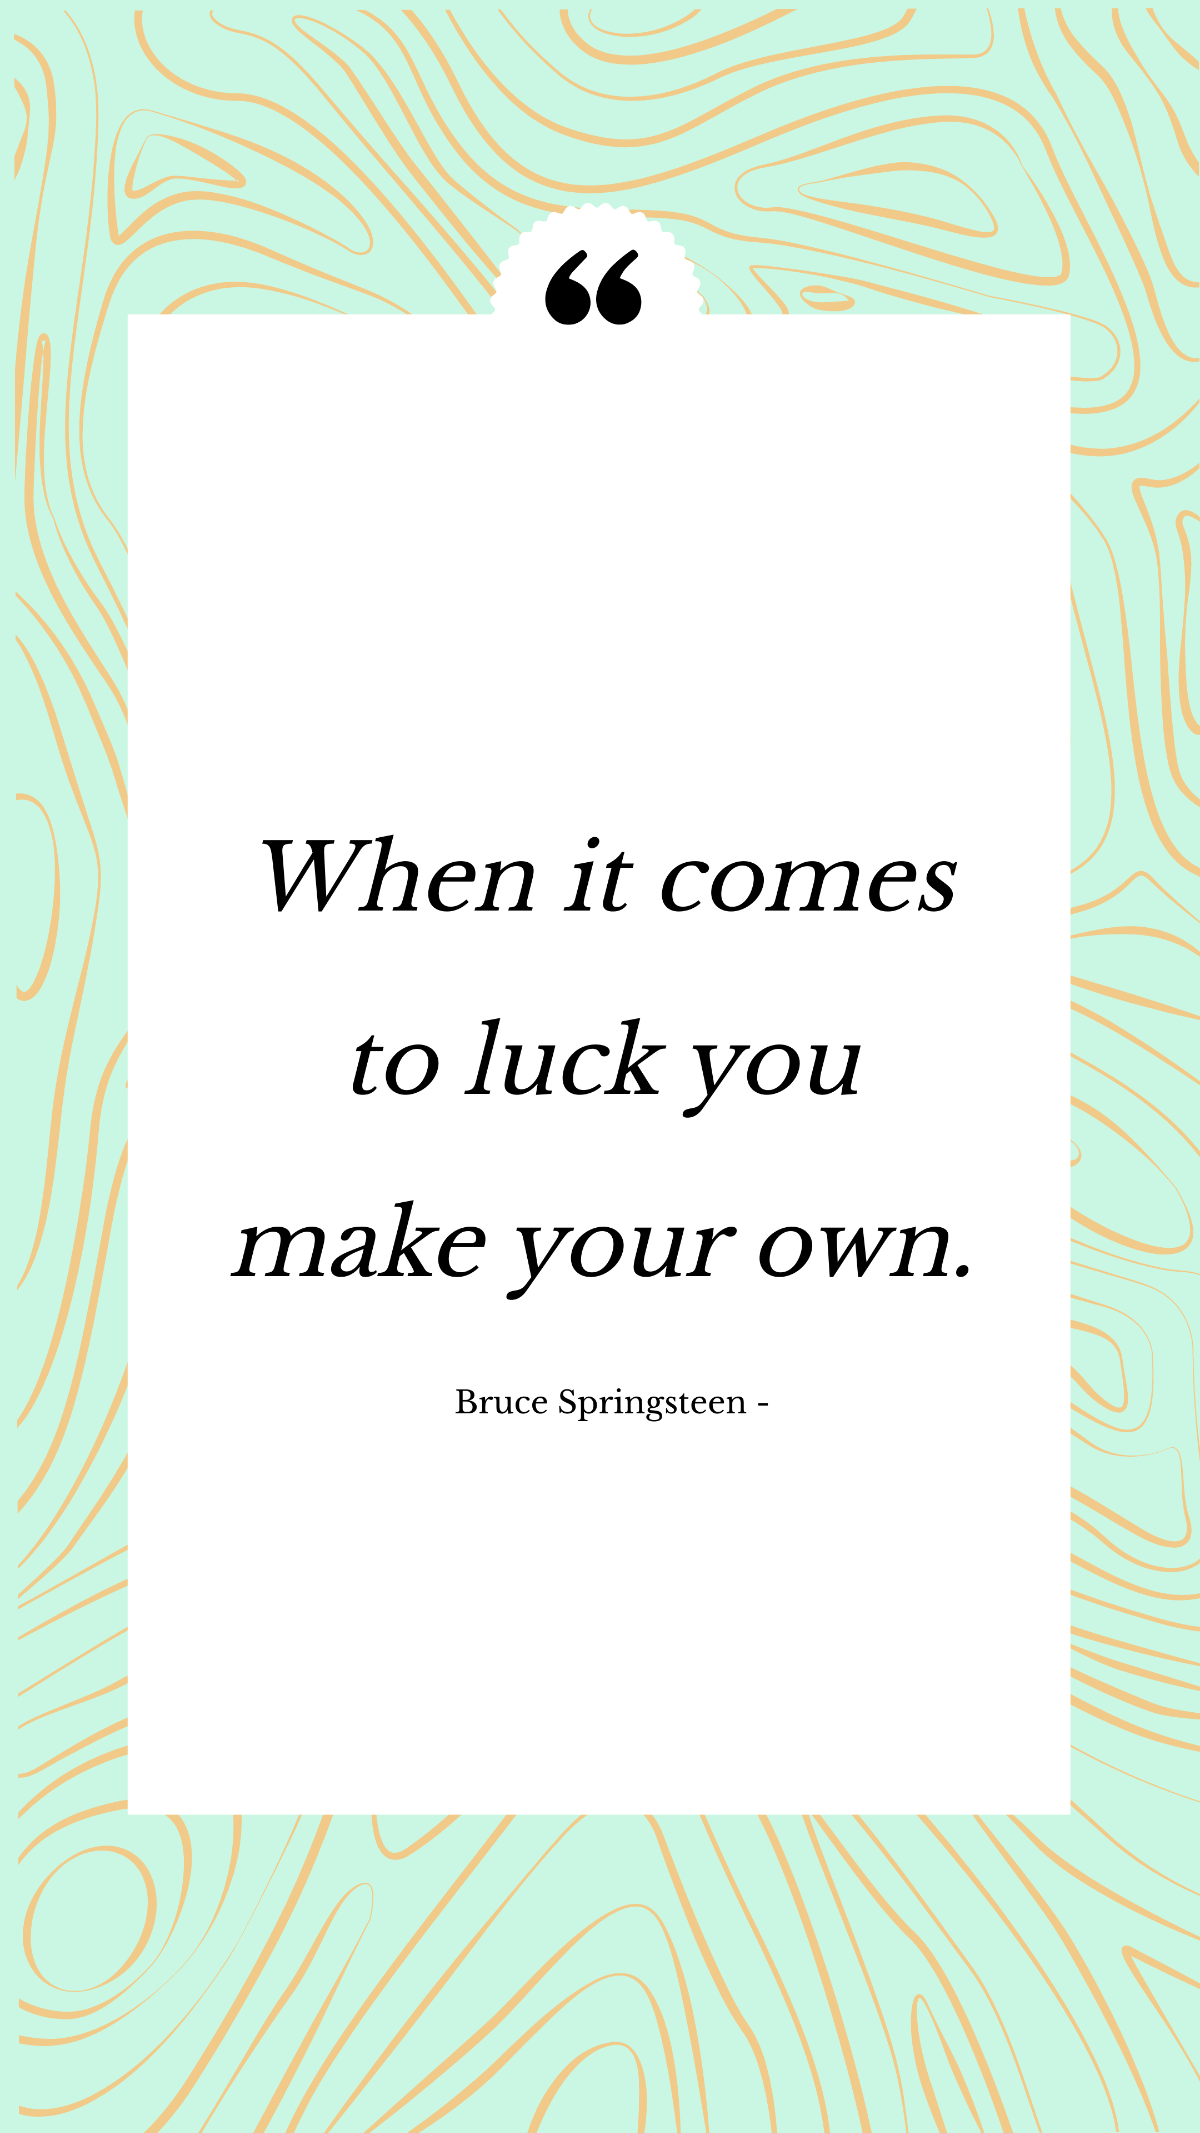 Bruce Springsteen - When it comes to luck you make your own. Template